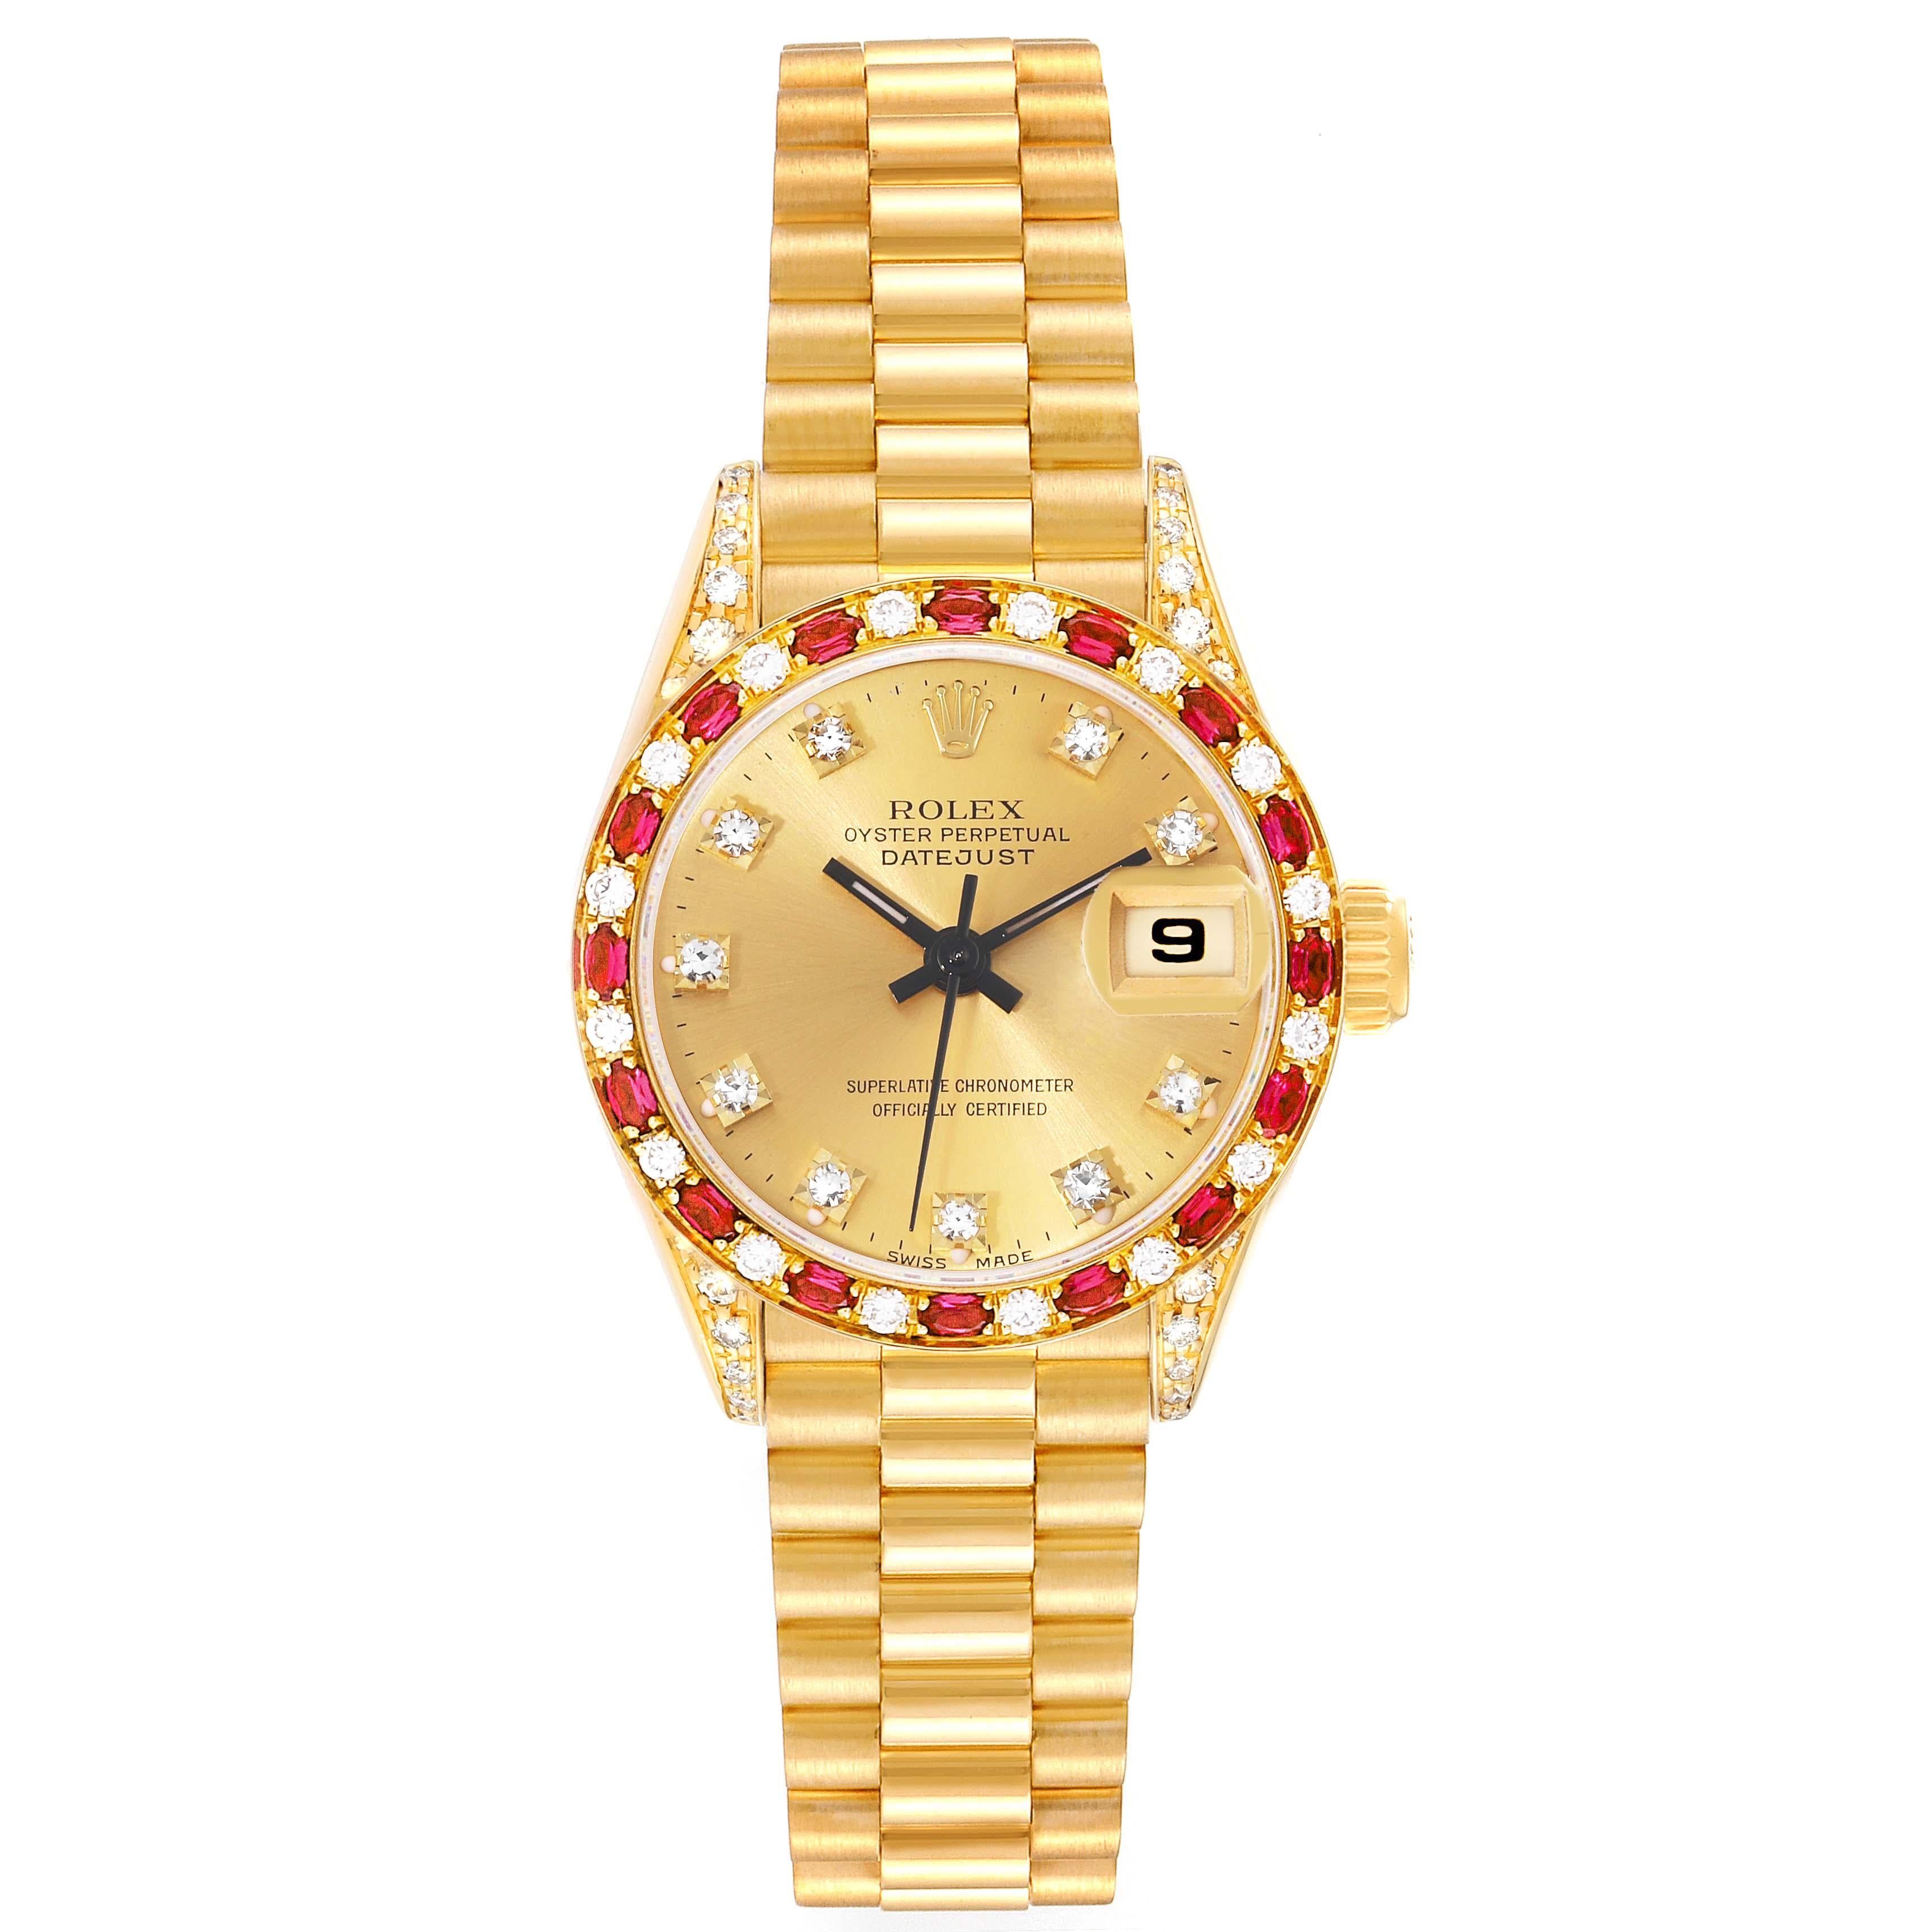 Rolex President Yellow Gold Diamond Ruby Ladies Watch 69198. Officially certified chronometer automatic self-winding movement. 18k yellow gold oyster case 26.0 mm in diameter. Rolex logo on the crown. Original Rolex factory diamond encrusted lugs.